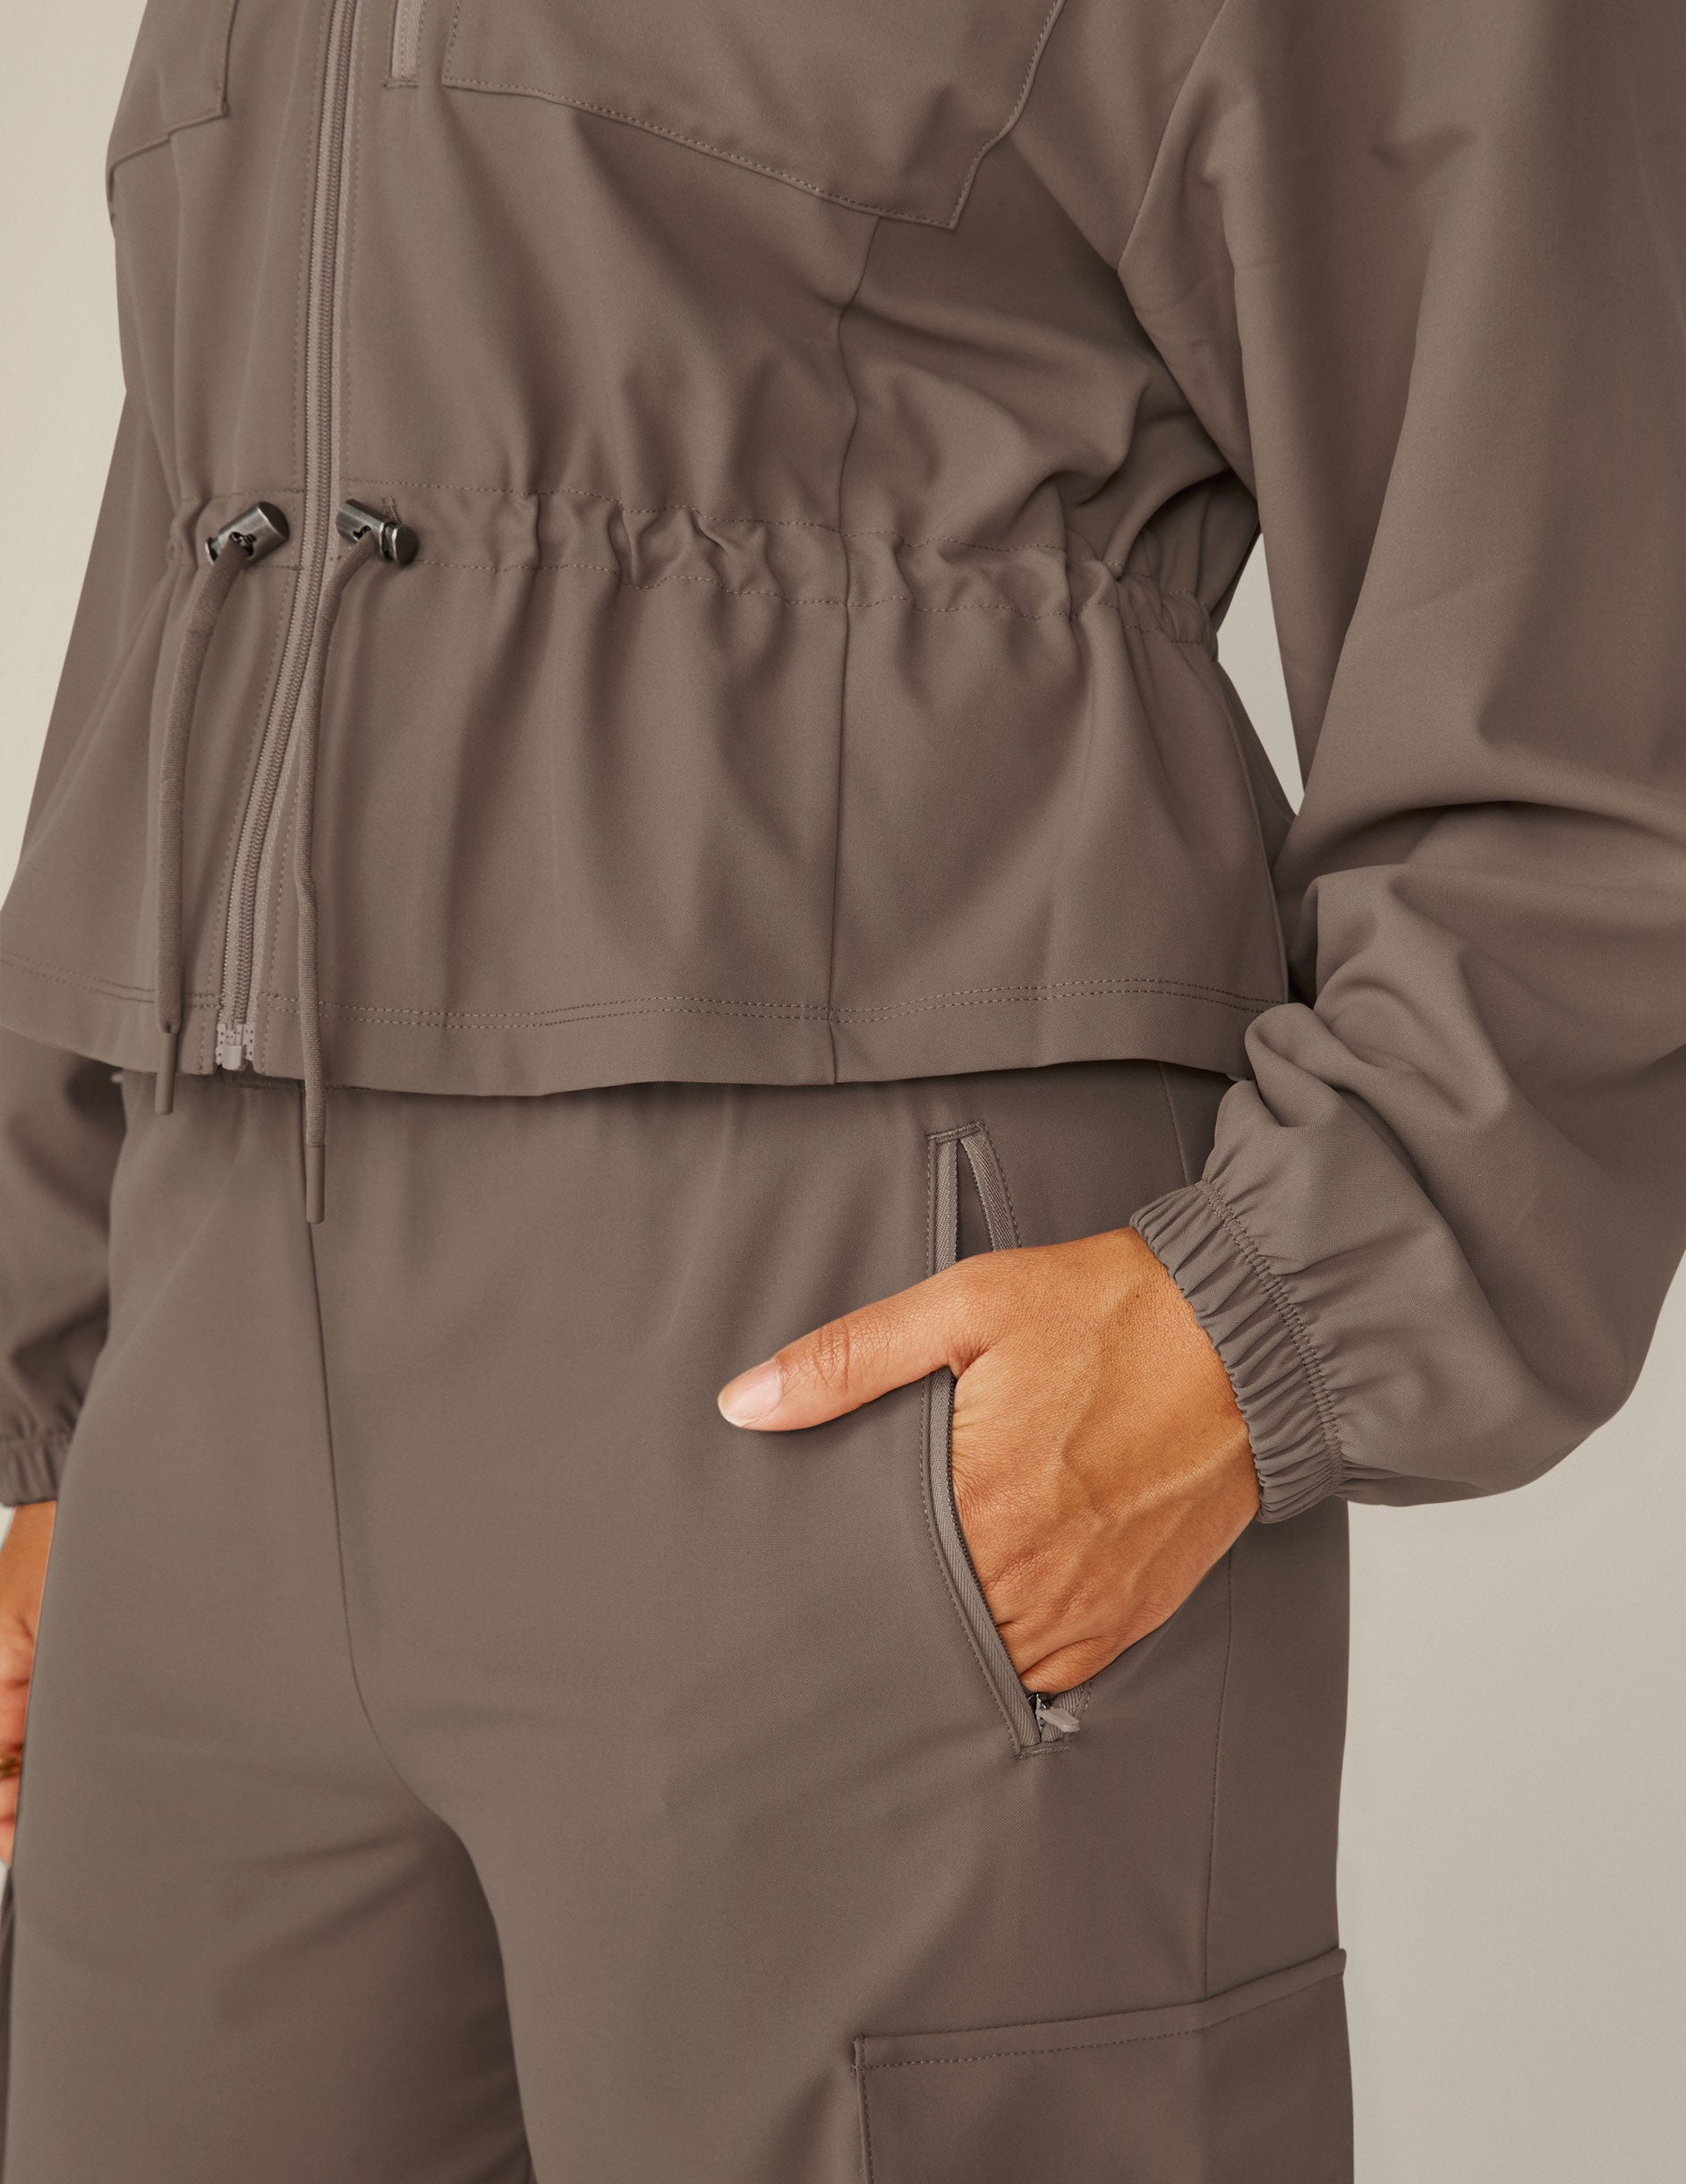 brown cargo style zip-up jacket with a drawstring tie at waist and pockets. 